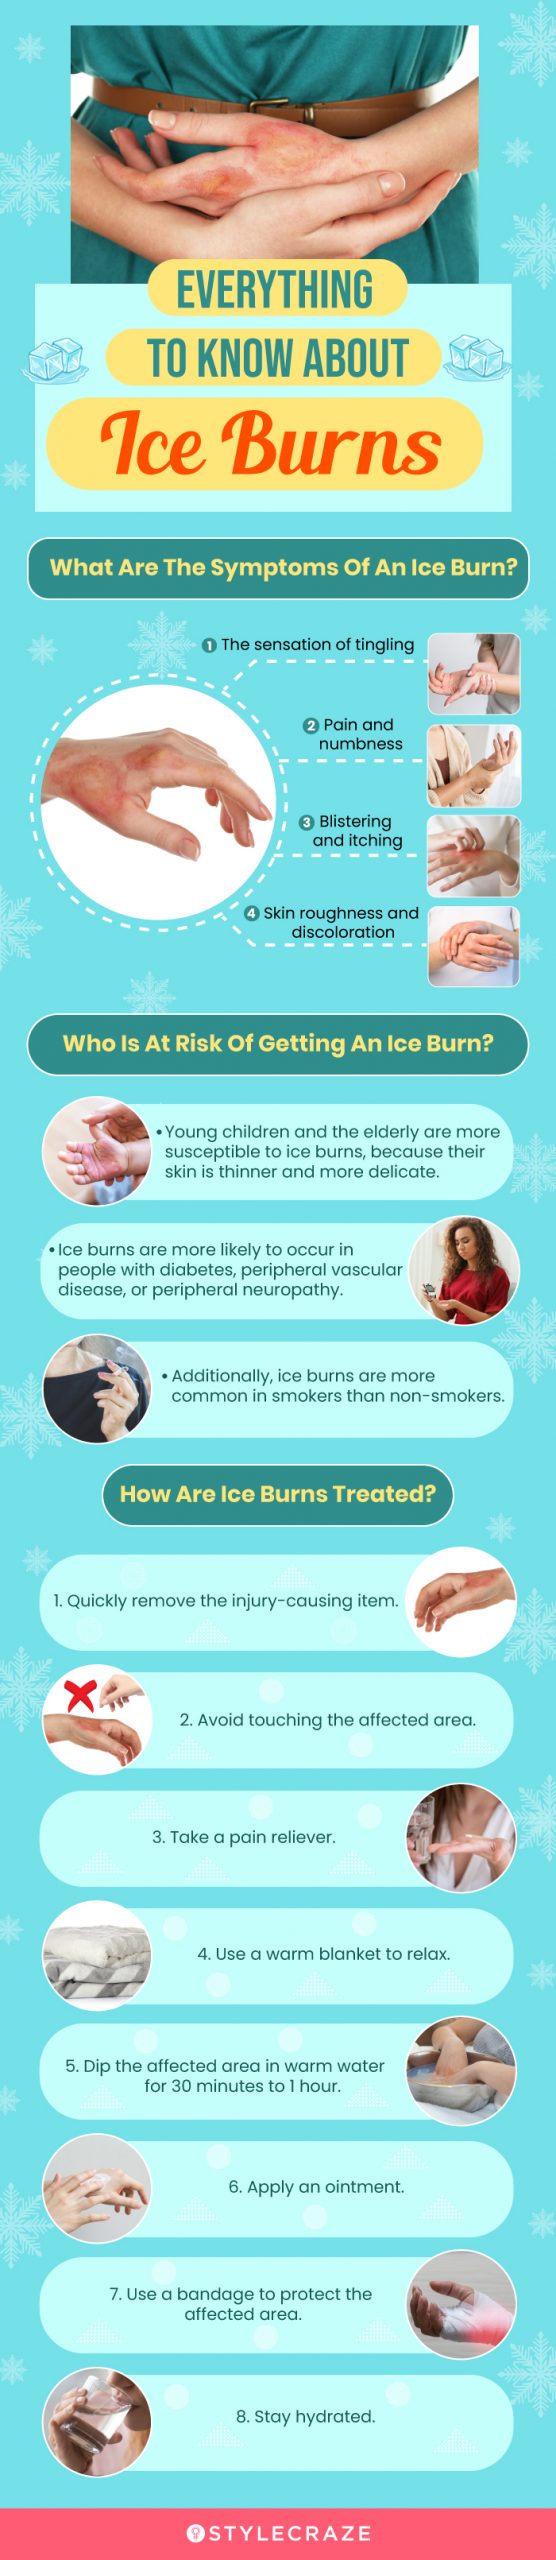 everything to know about ice burns [infographic]